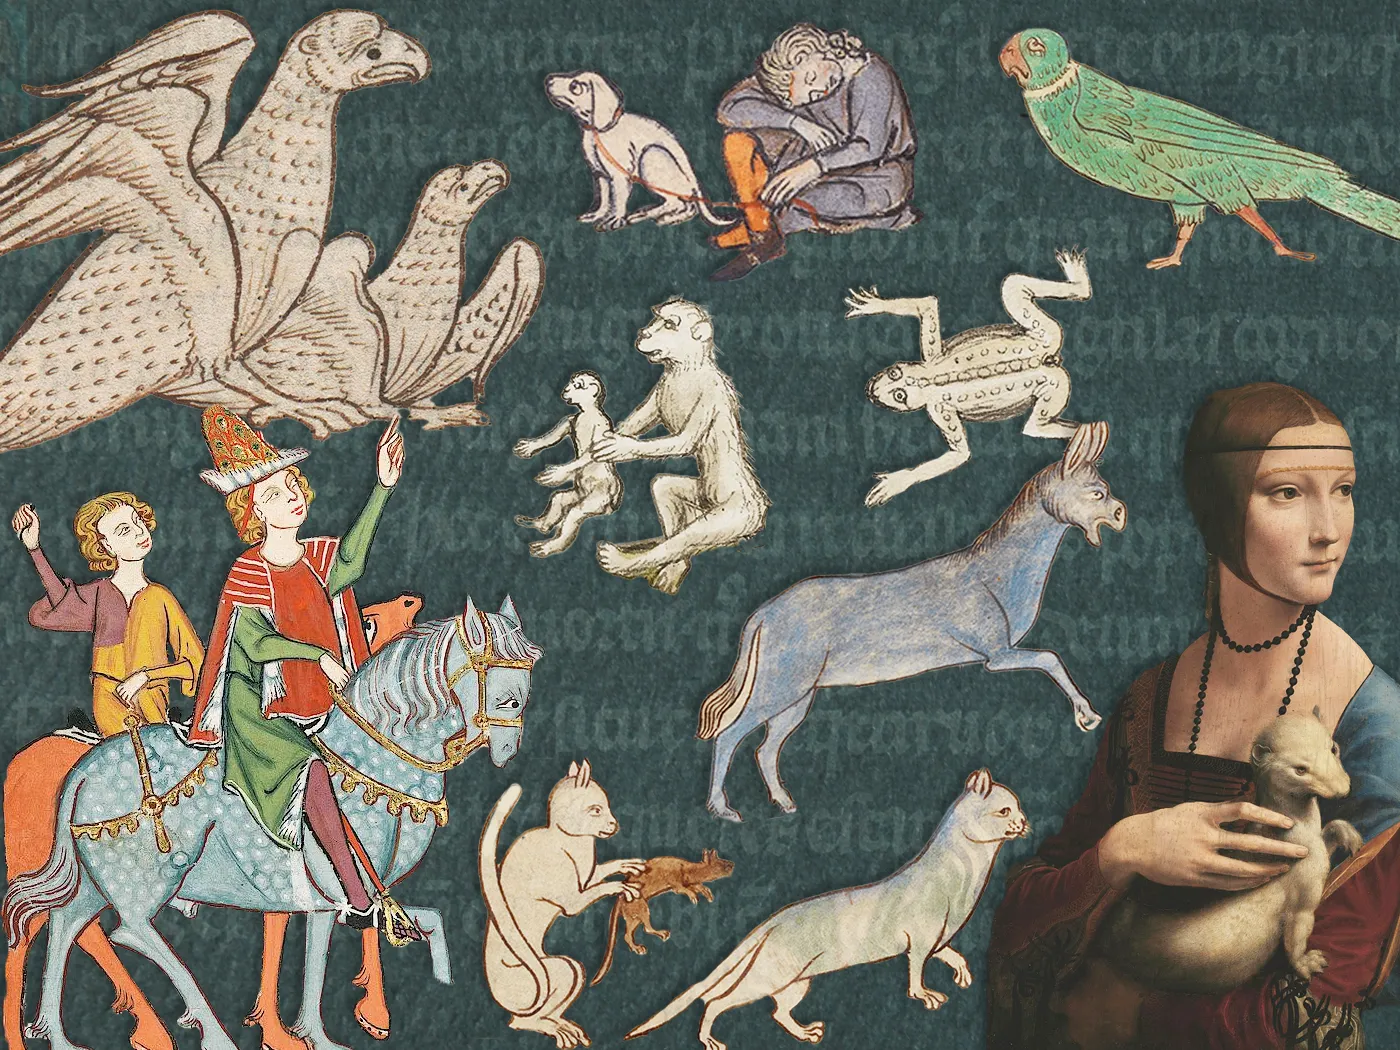 Illustration of medieval animals, including horses, an ermine, cats and mice, a dog, a parrot and hawks